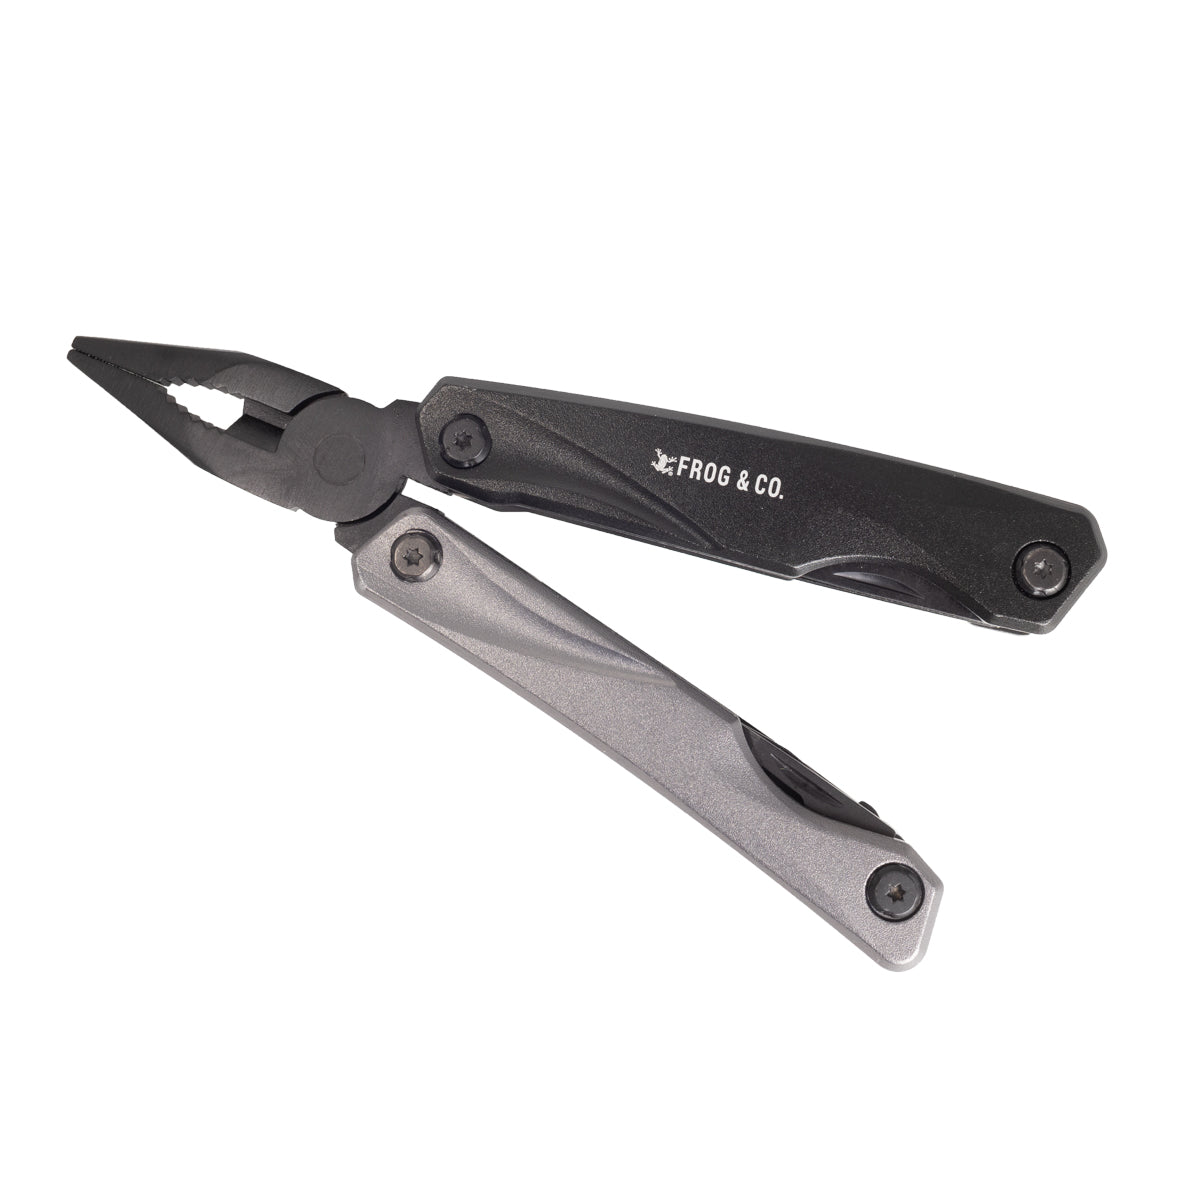 Multi-Tool Knife by Frog & CO